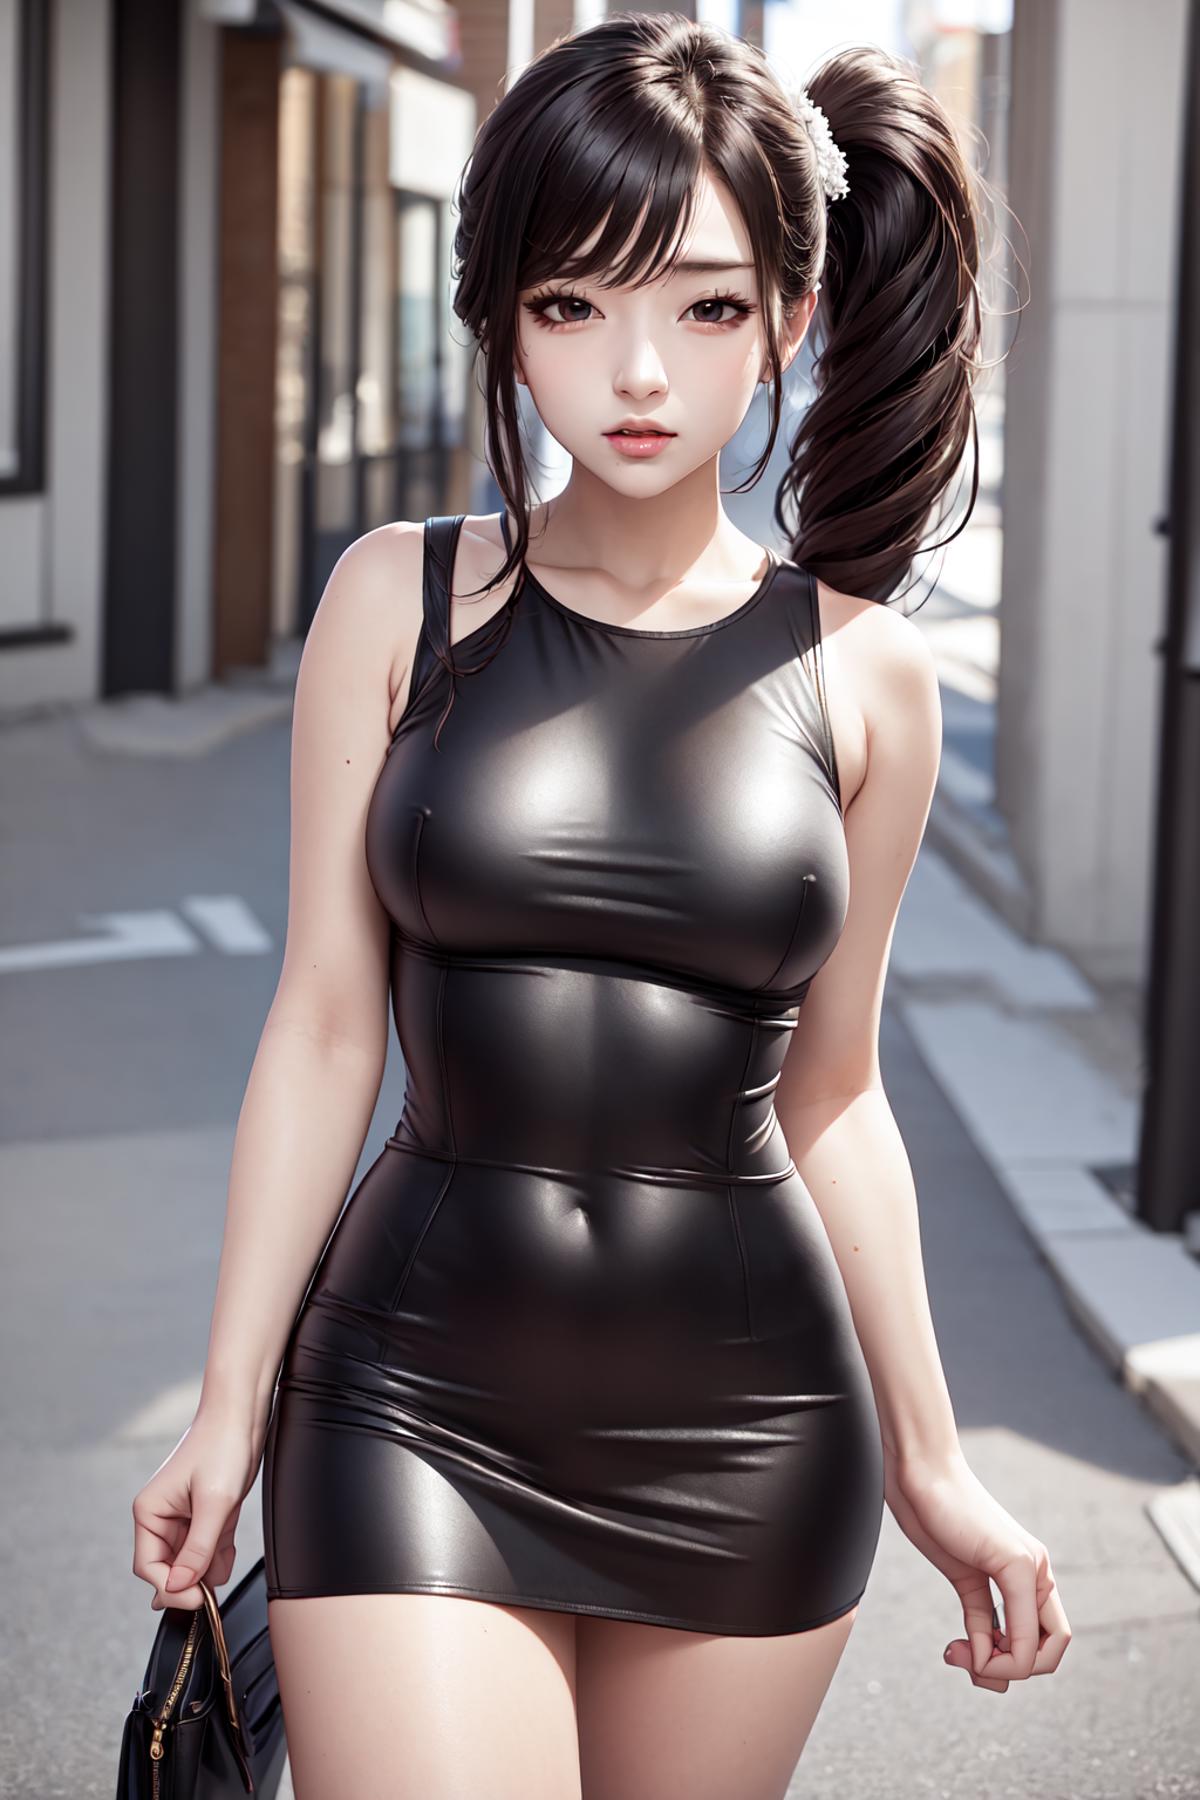 AI model image by n15g